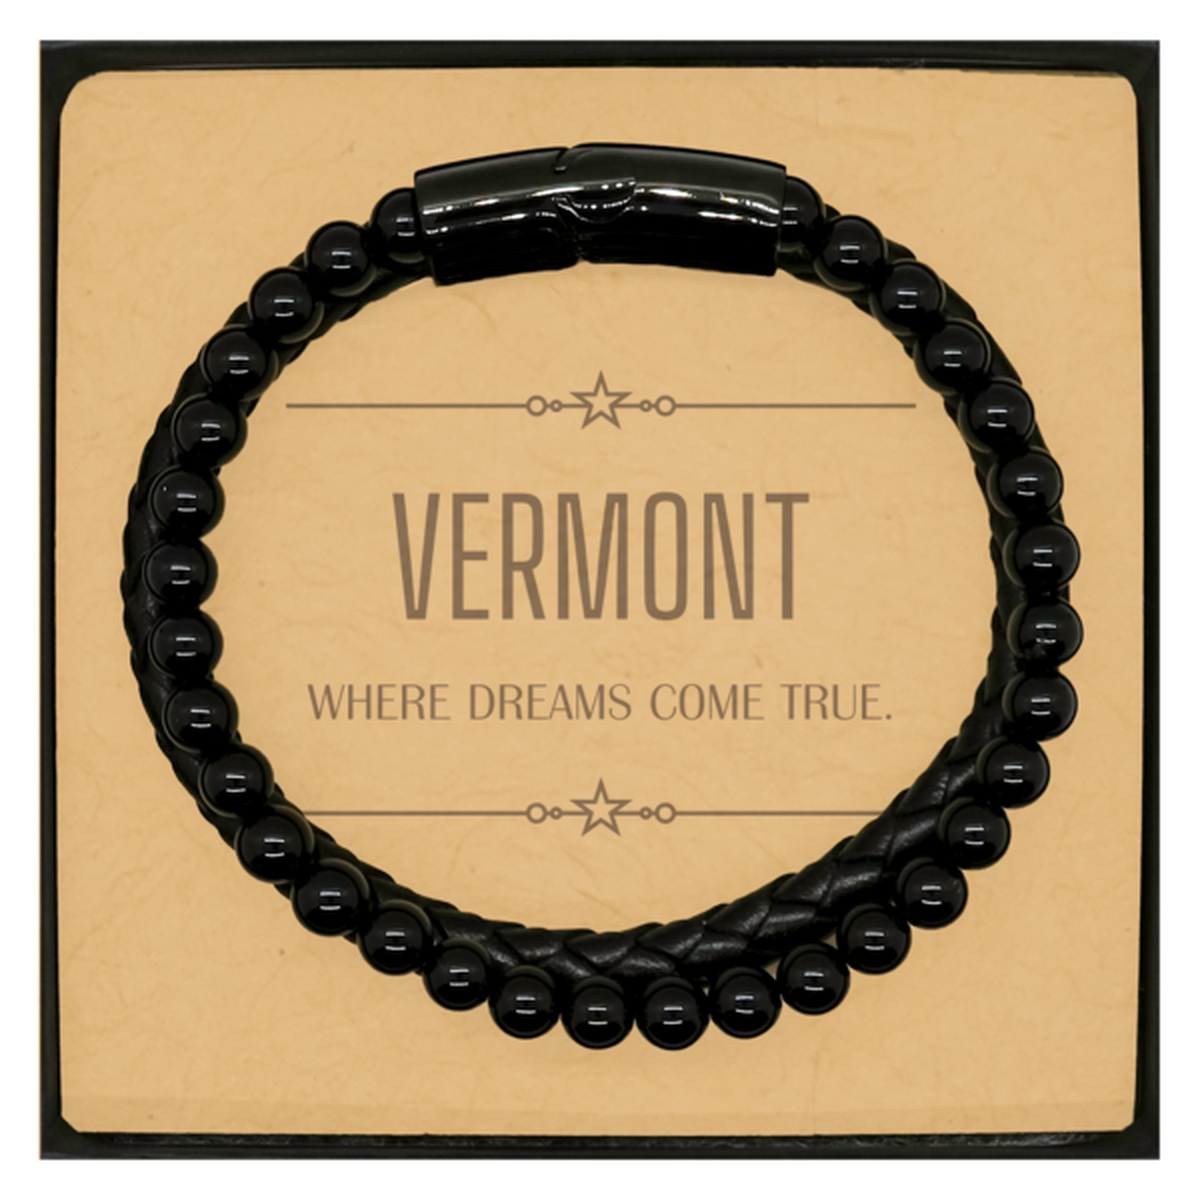 Love Vermont State Stone Leather Bracelets, Vermont Where dreams come true, Birthday Christmas Inspirational Gifts For Vermont Men, Women, Friends